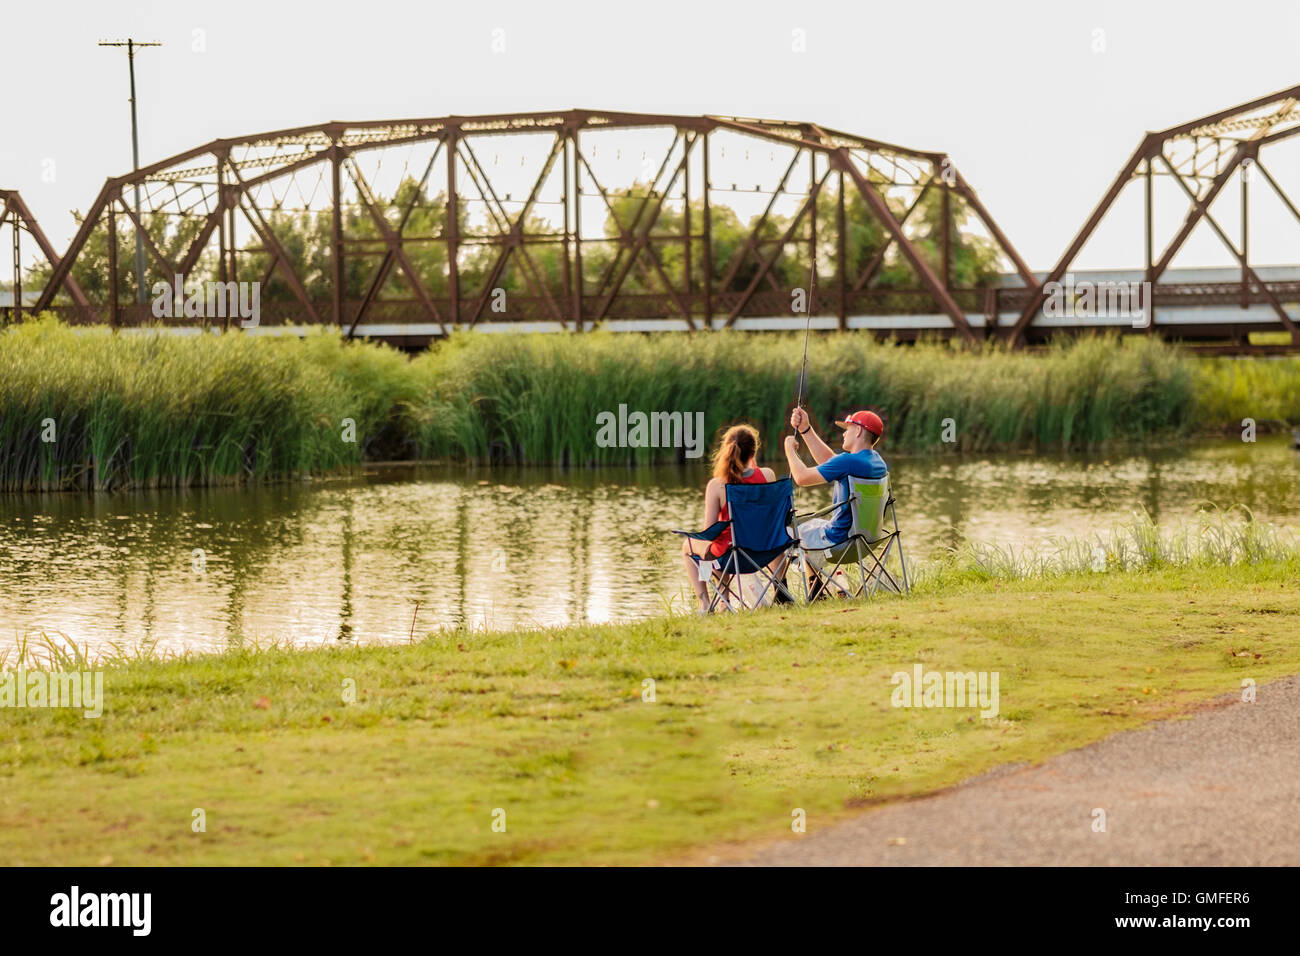 A young Caucasian couple enjoy fishing on the shoreline of the North Canadian river near the Lake Overholser steel truss bridge. Oklahoma, USA. Stock Photo